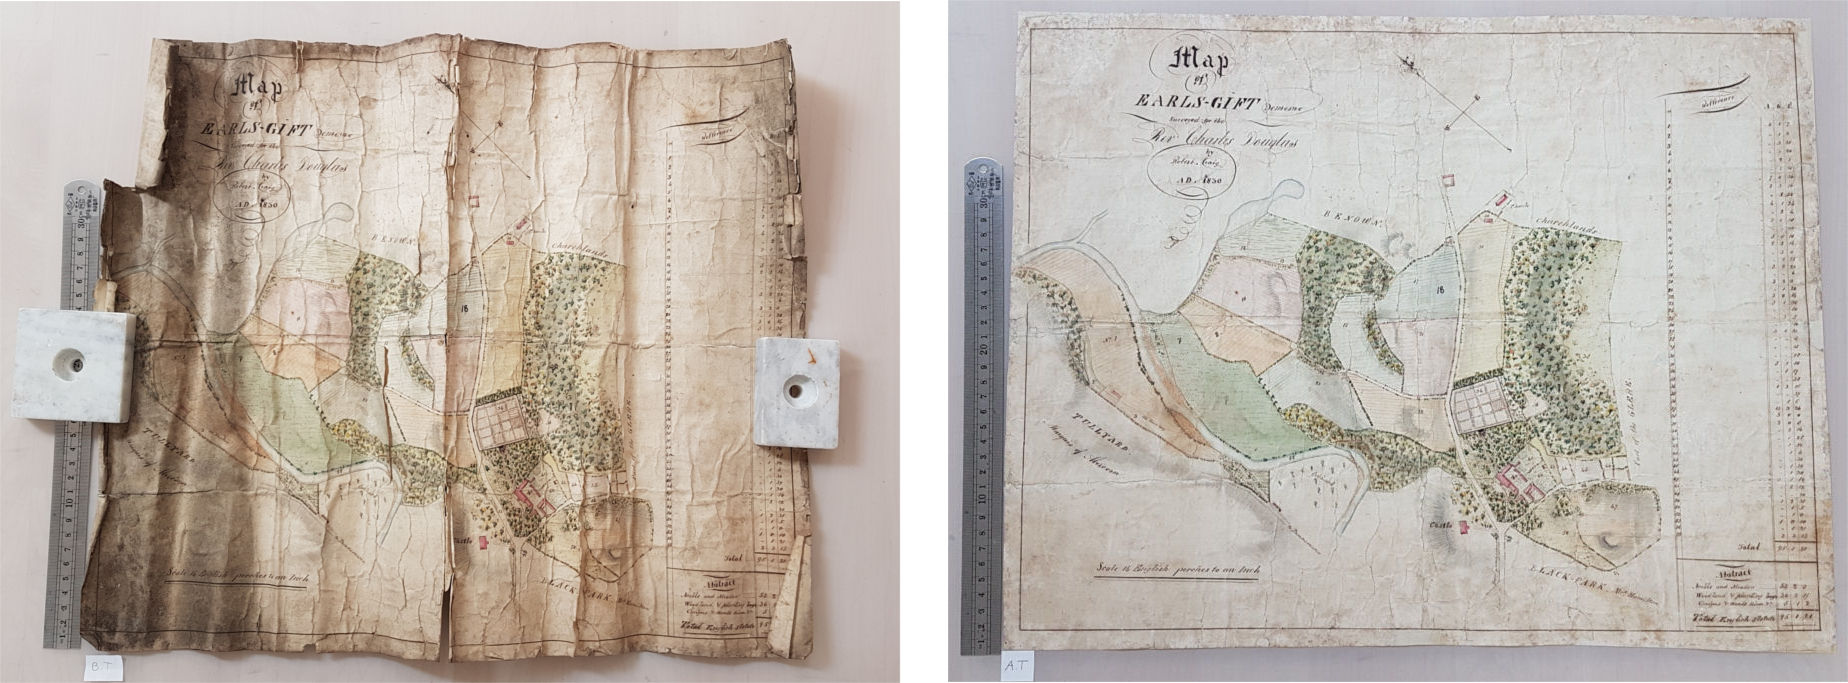 The Earl's Gift map before and after repair and conservation by Liz D'Arcy at the Paperworks Studio